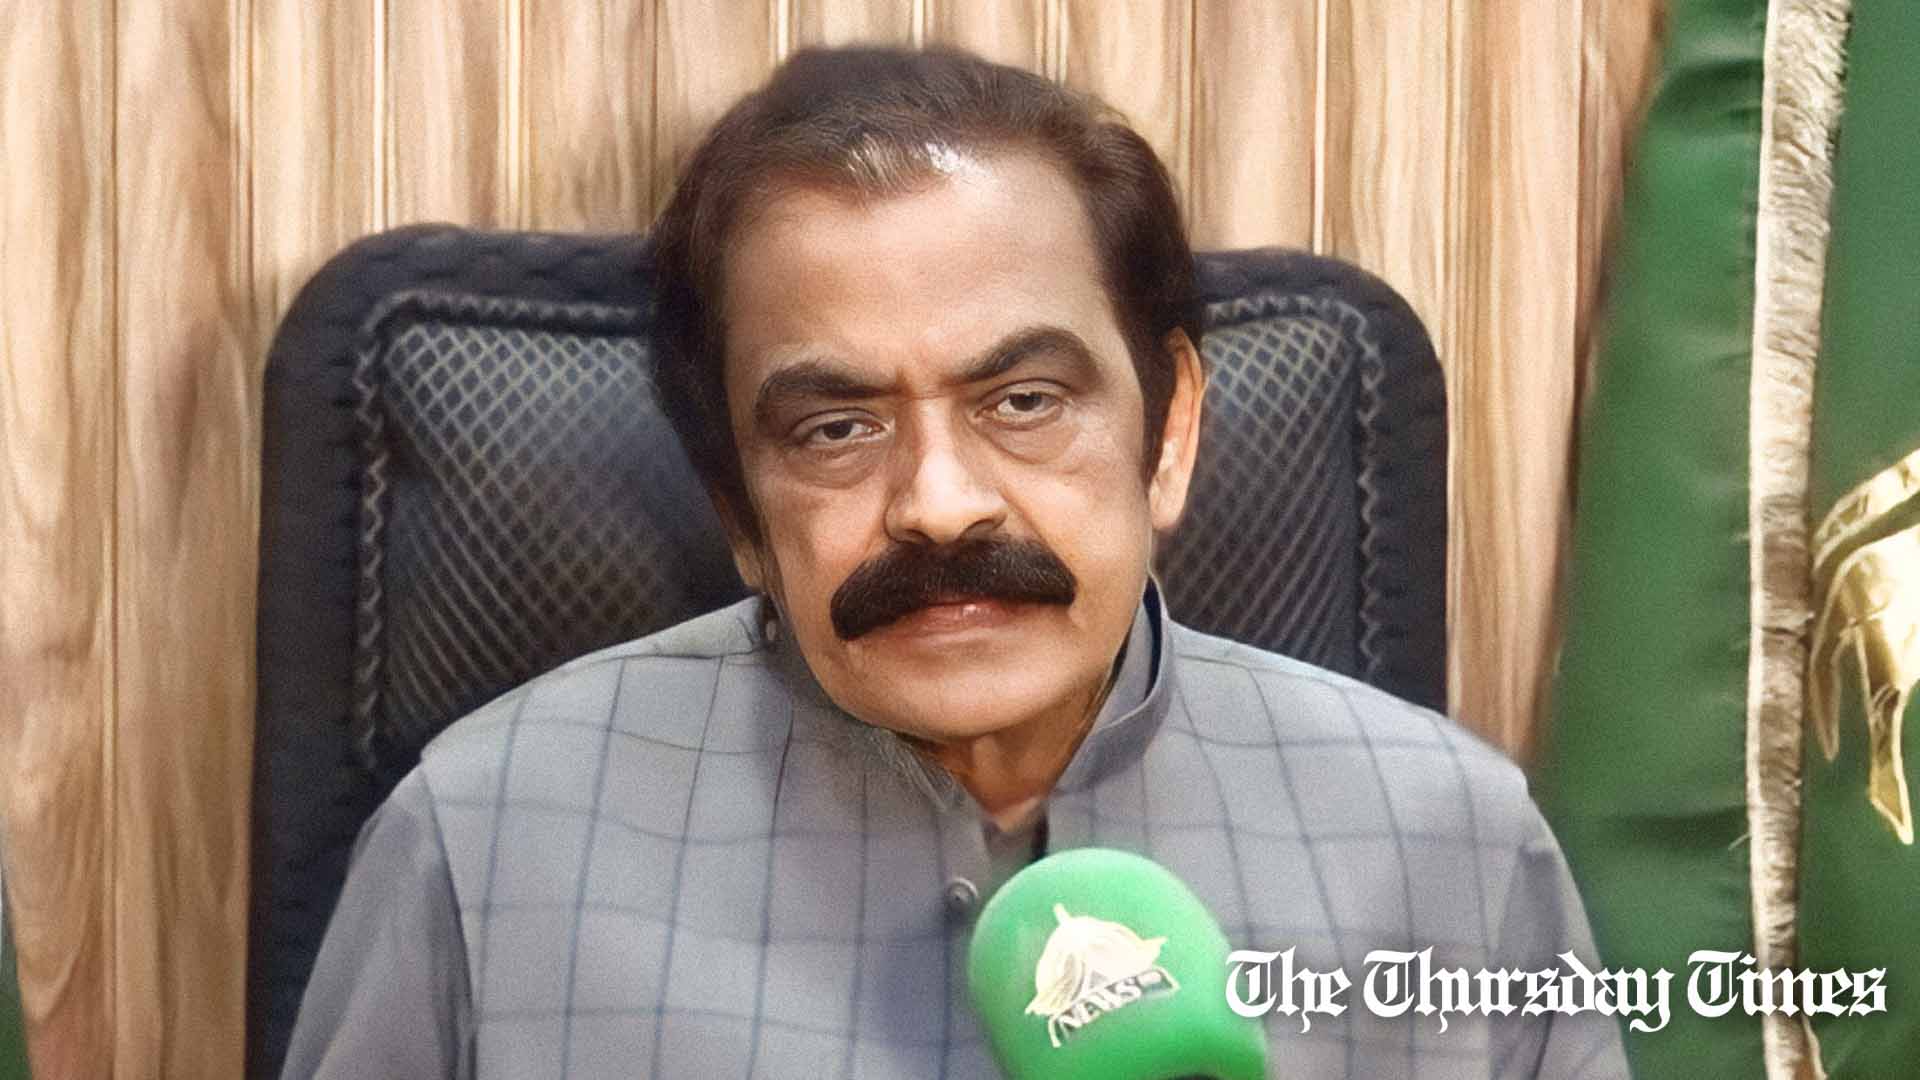 A file photo is shown of interior minister Rana Sanaullah addressing a press conference at Faisalabad. — FILE/THE THURSDAY TIMES